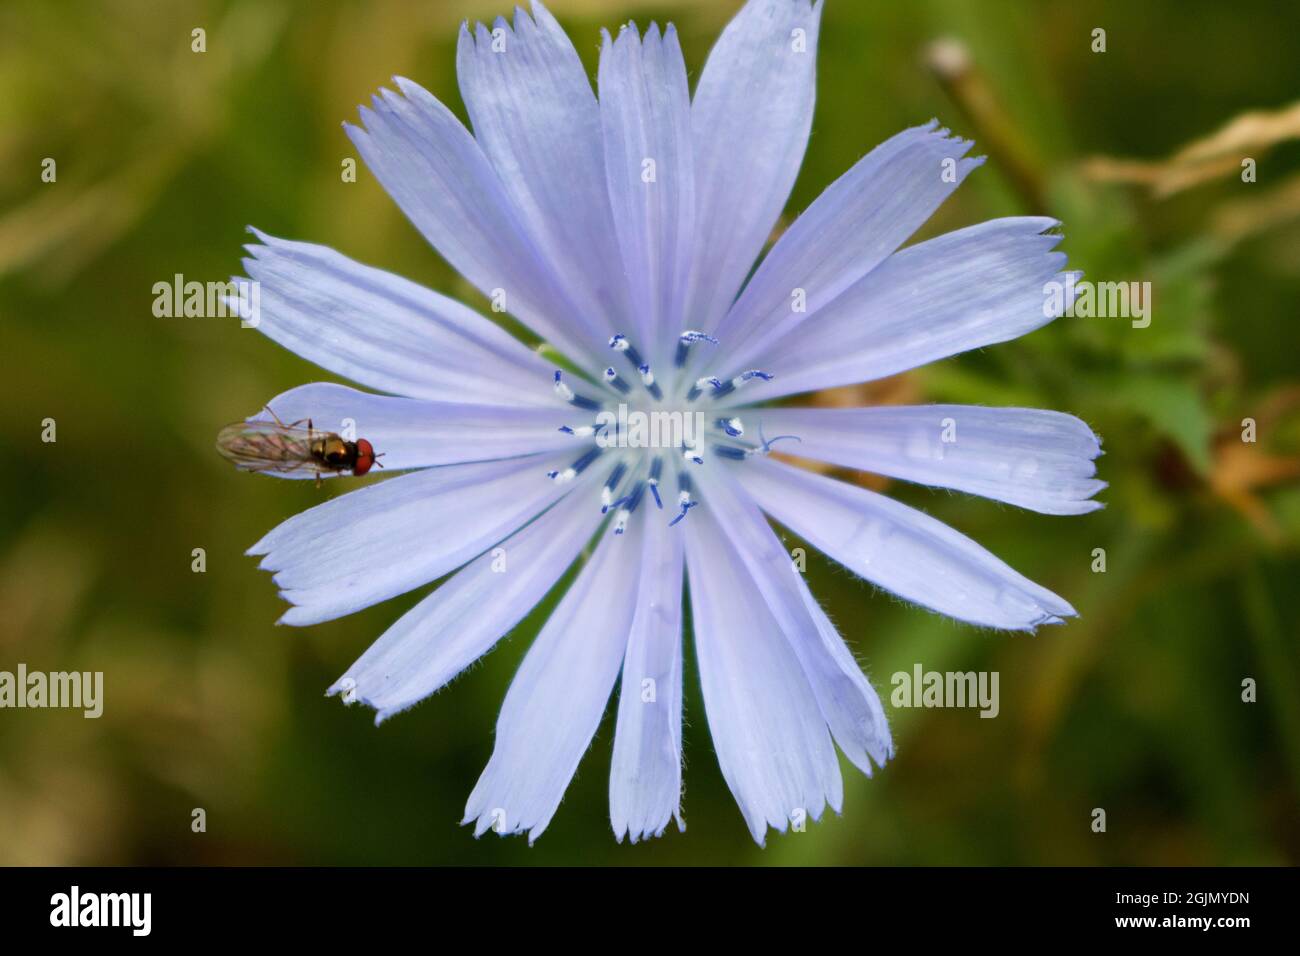 insect on a common chicory flower Cichorium intybus Stock Photo